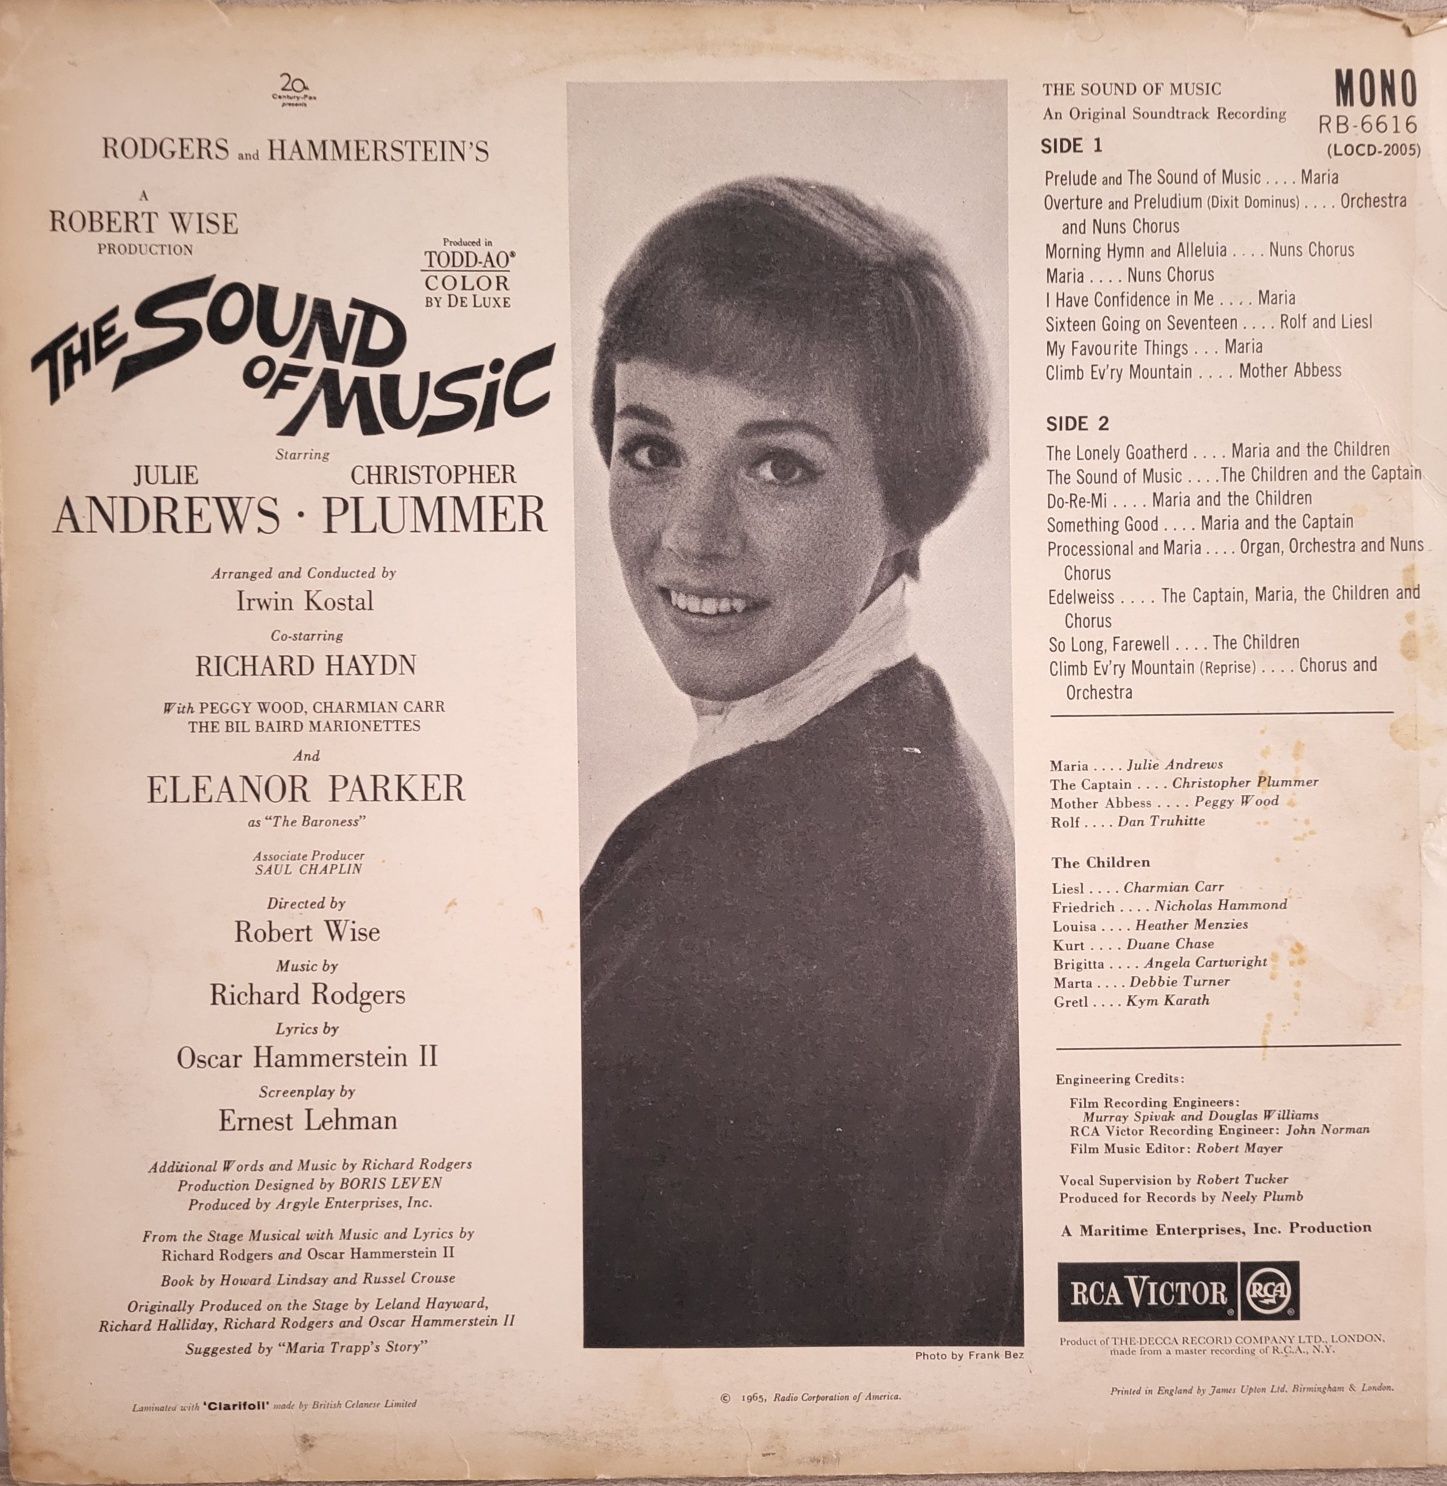 The Sound of Music VG